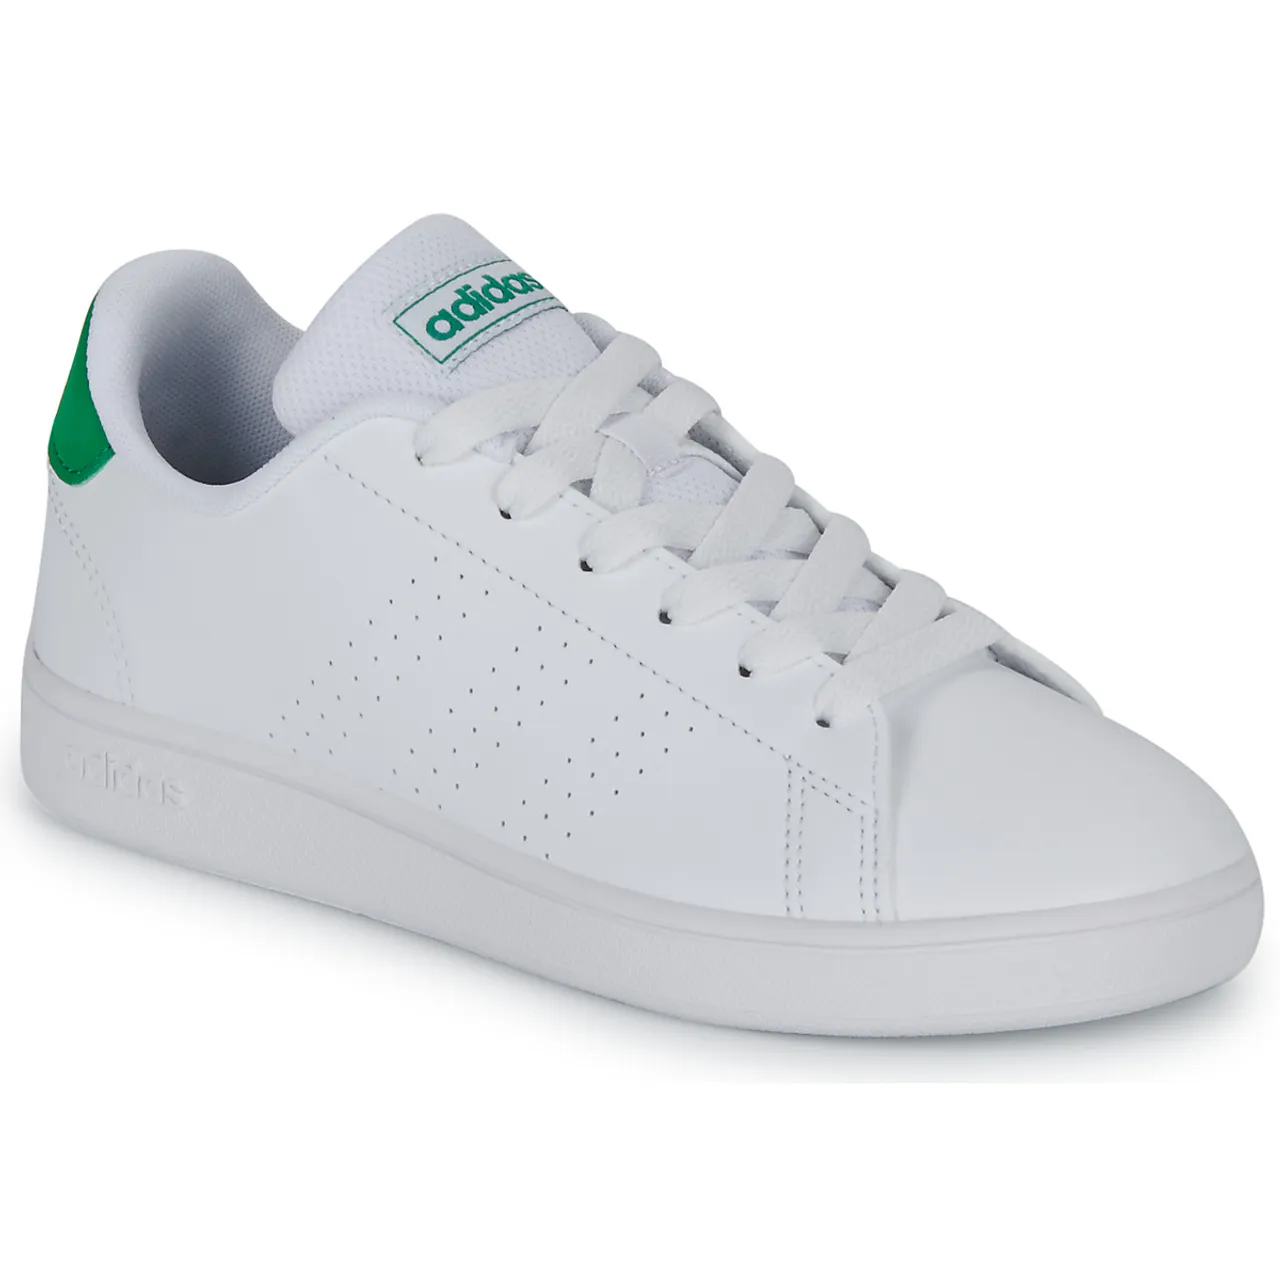 adidas  ADVANTAGE K  boys's Children's Shoes (Trainers) in White